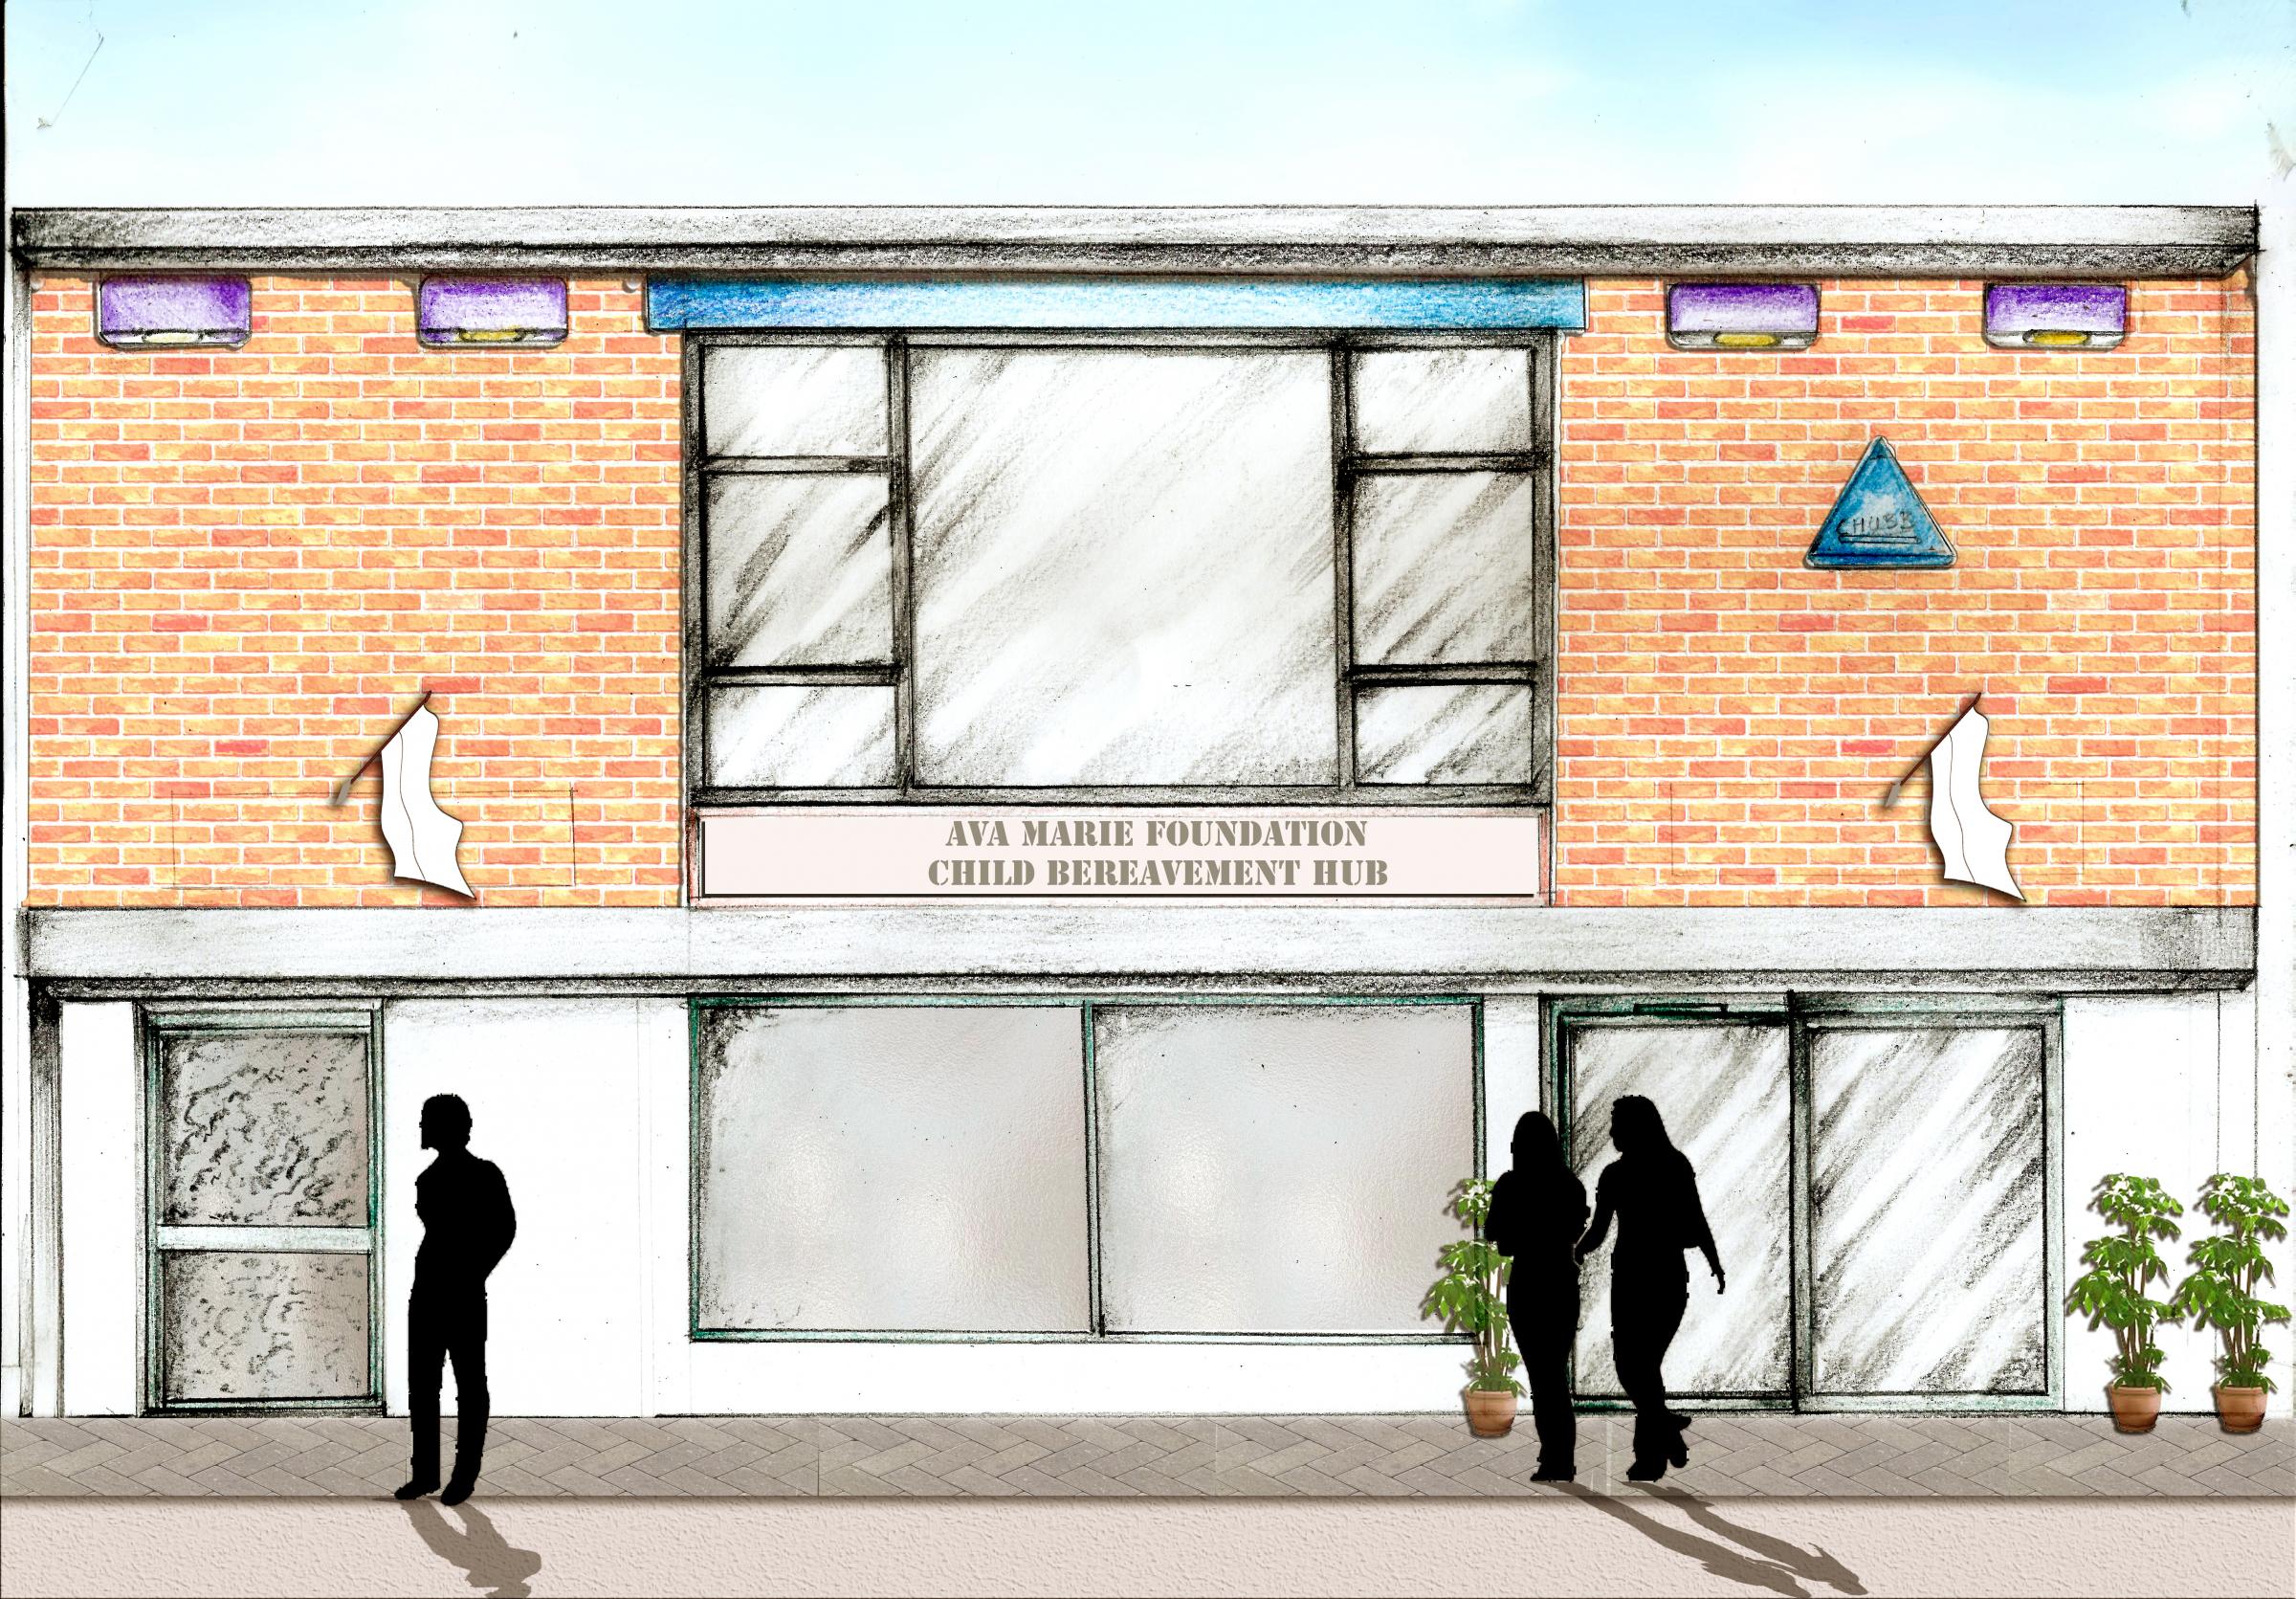 An artist impression of what the Ava Marie Foundation Child Bereavement Hub would look like